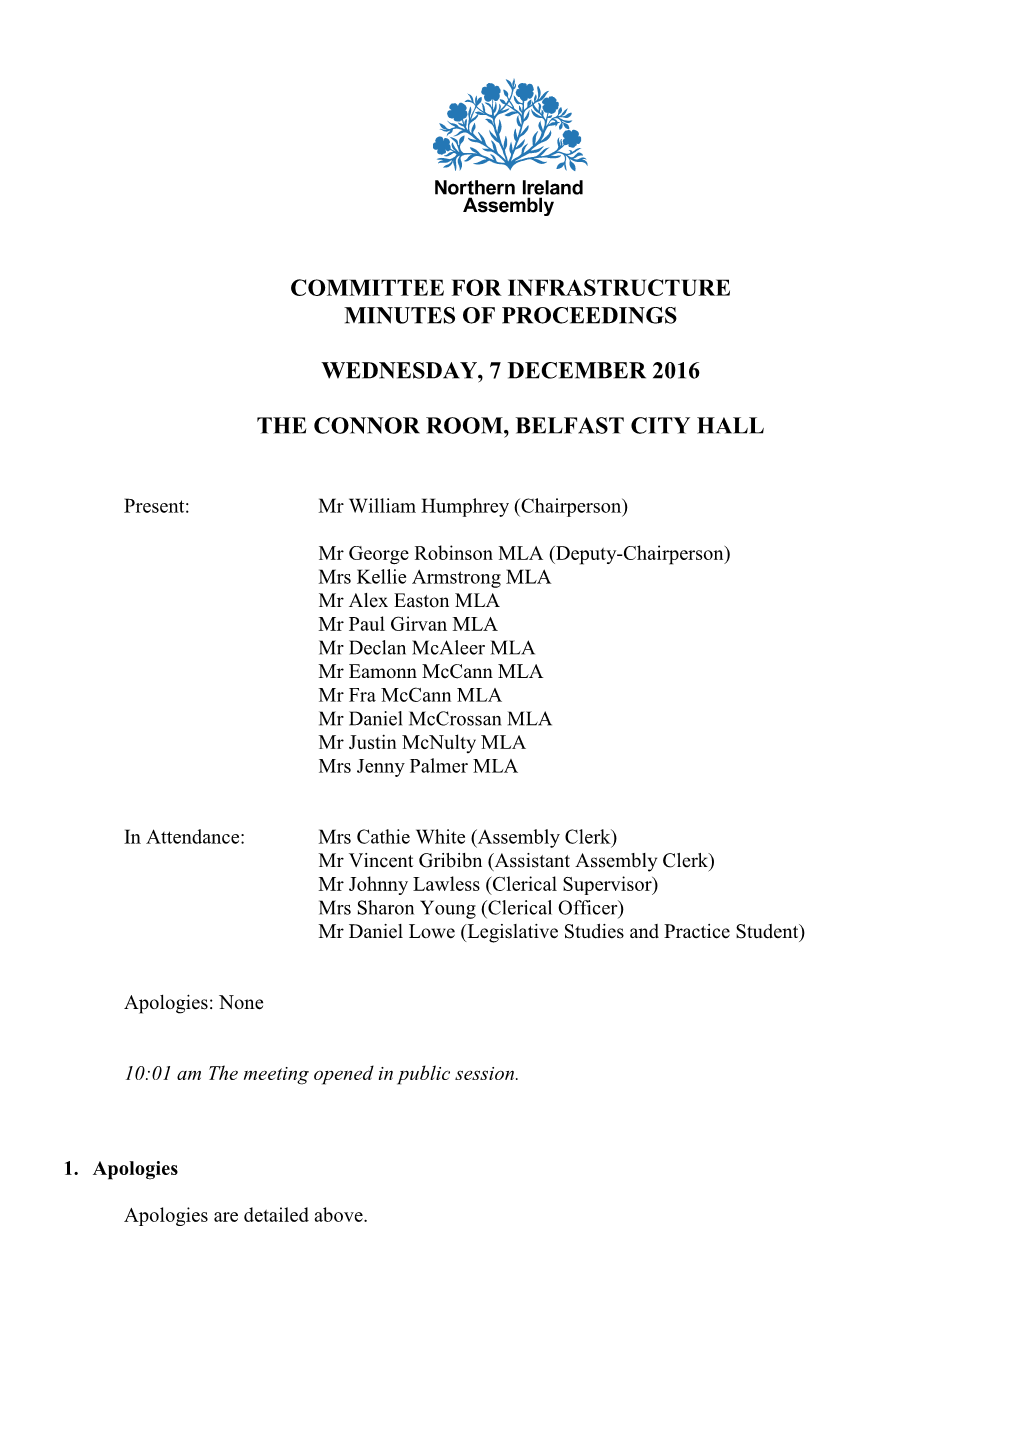 Committee for Infrastructure Minutes of Proceedings Wednesday, 7 December 2016 the Connor Room, Belfast City Hall